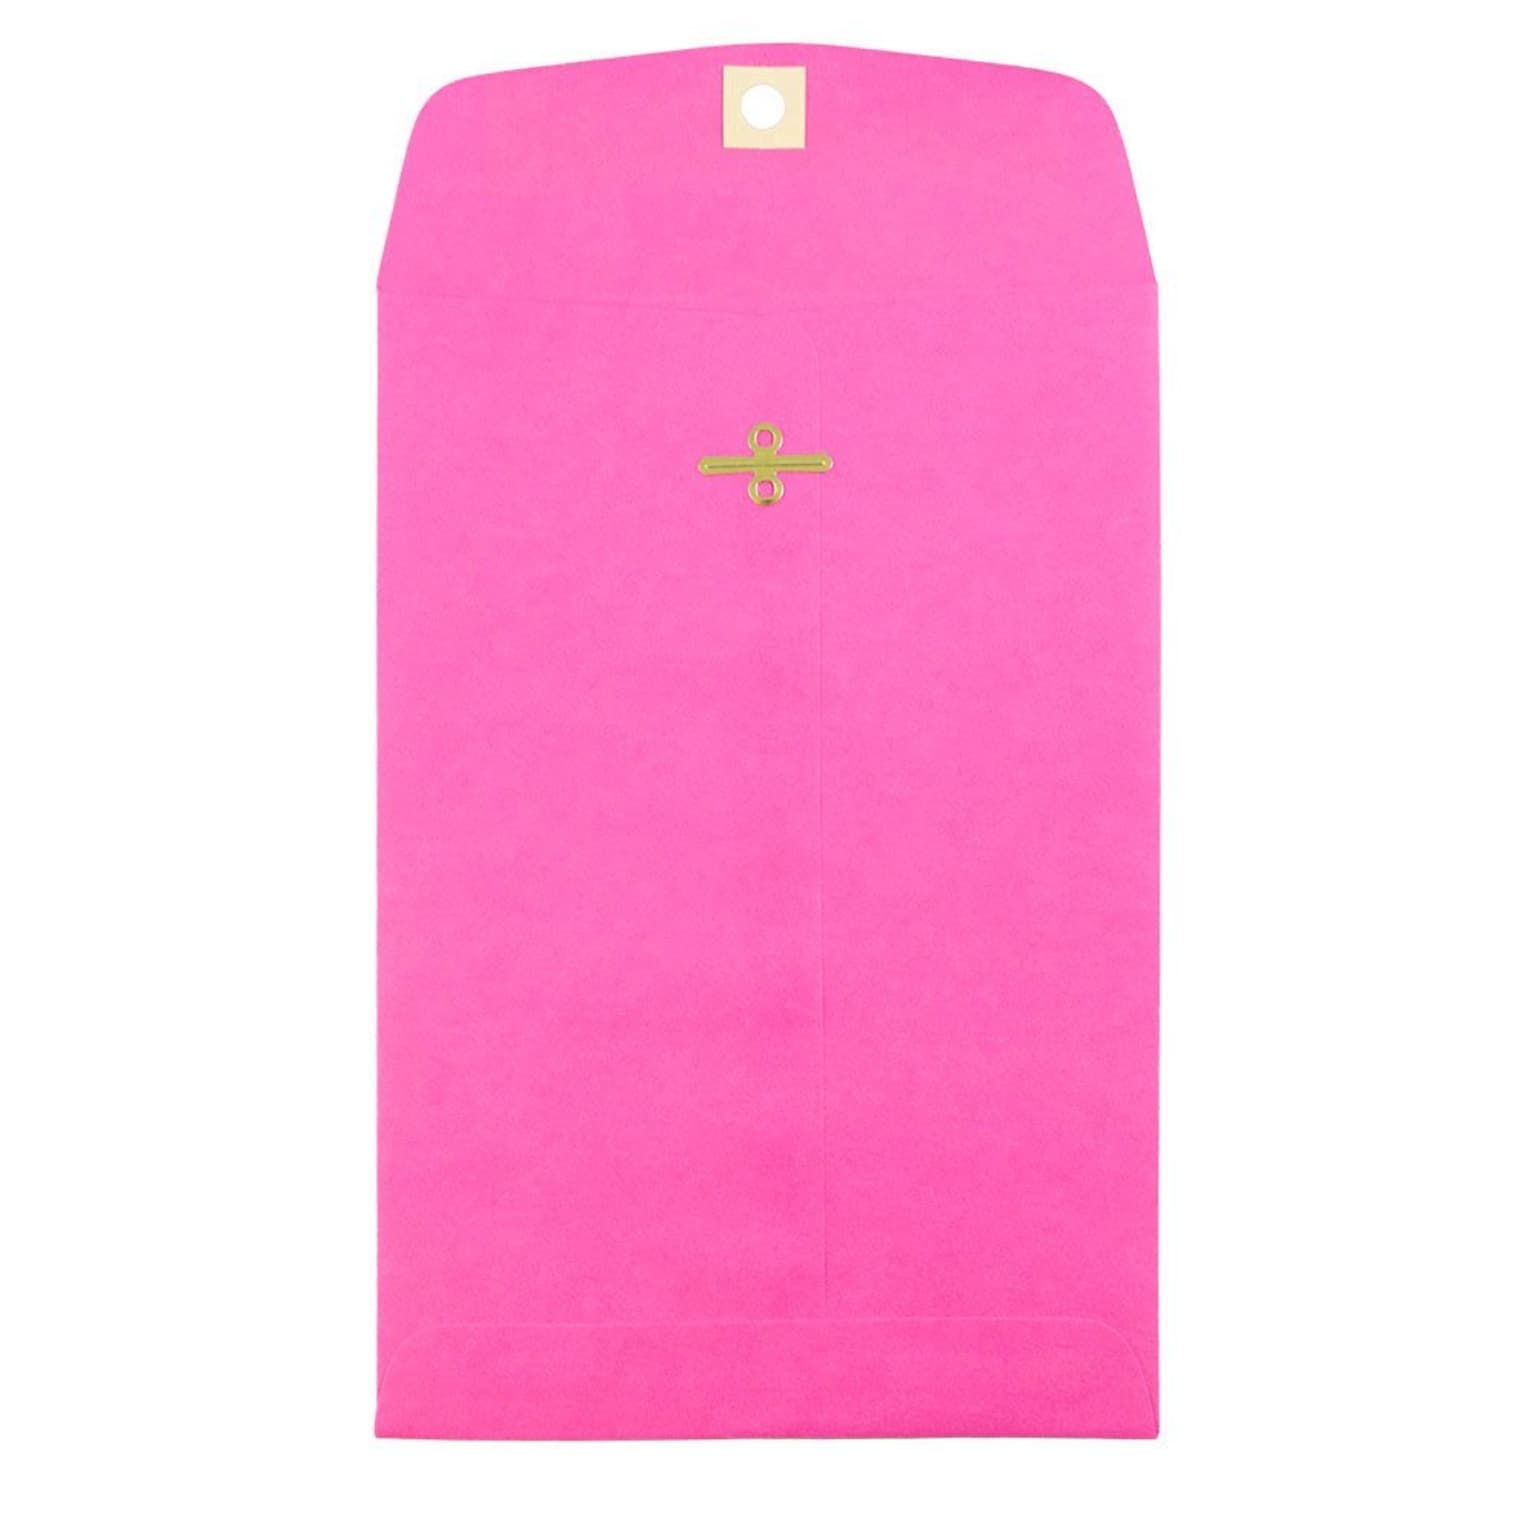 JAM Paper 6 x 9 Open End Catalog Colored Envelopes with Clasp Closure, Ultra Fuchsia Pink, 10/Pack (900909024B)